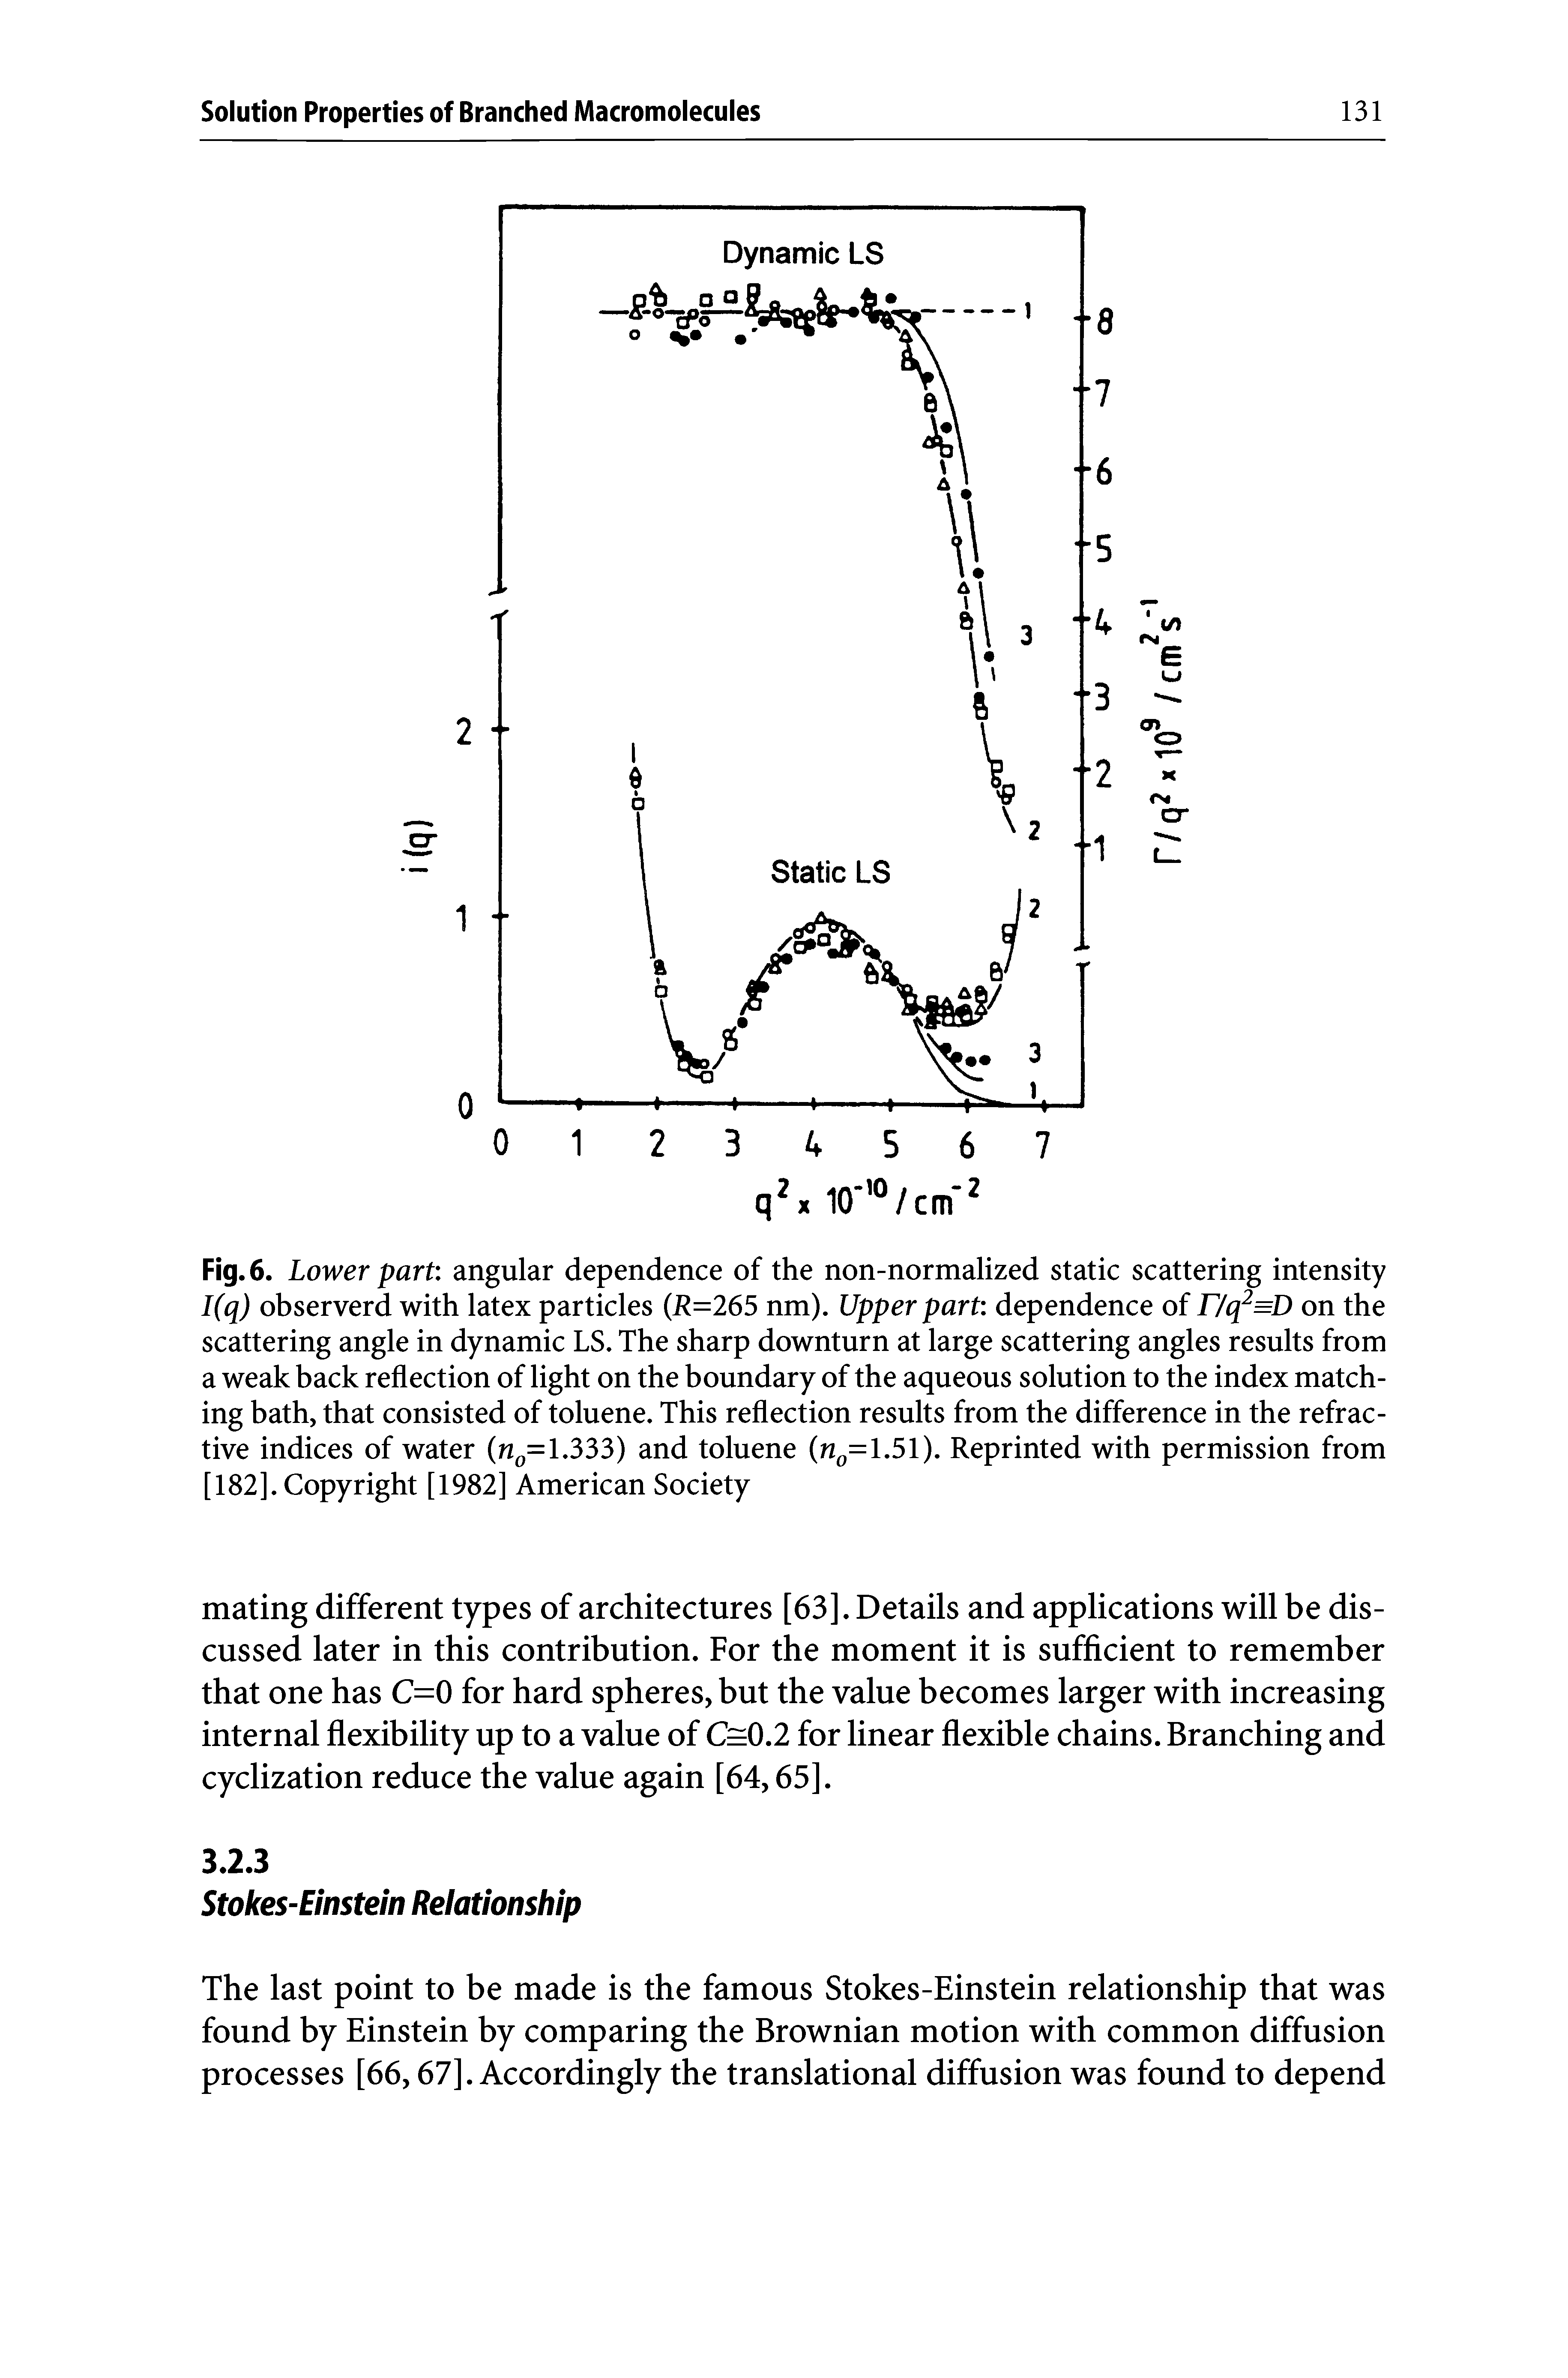 Fig. 6. Lower part angular dependence of the non-normalized static scattering intensity I(q) observerd with latex particles (R=265 nm). Upper part dependence of r/q =D on the scattering angle in dynamic LS. The sharp downturn at large scattering angles results from a weak back reflection of light on the boundary of the aqueous solution to the index matching bath, that consisted of toluene. This reflection results from the difference in the refractive indices of water (n = 1.333) and toluene (n =1.51). Reprinted with permission from [182]. Copyright [1982] American Society...